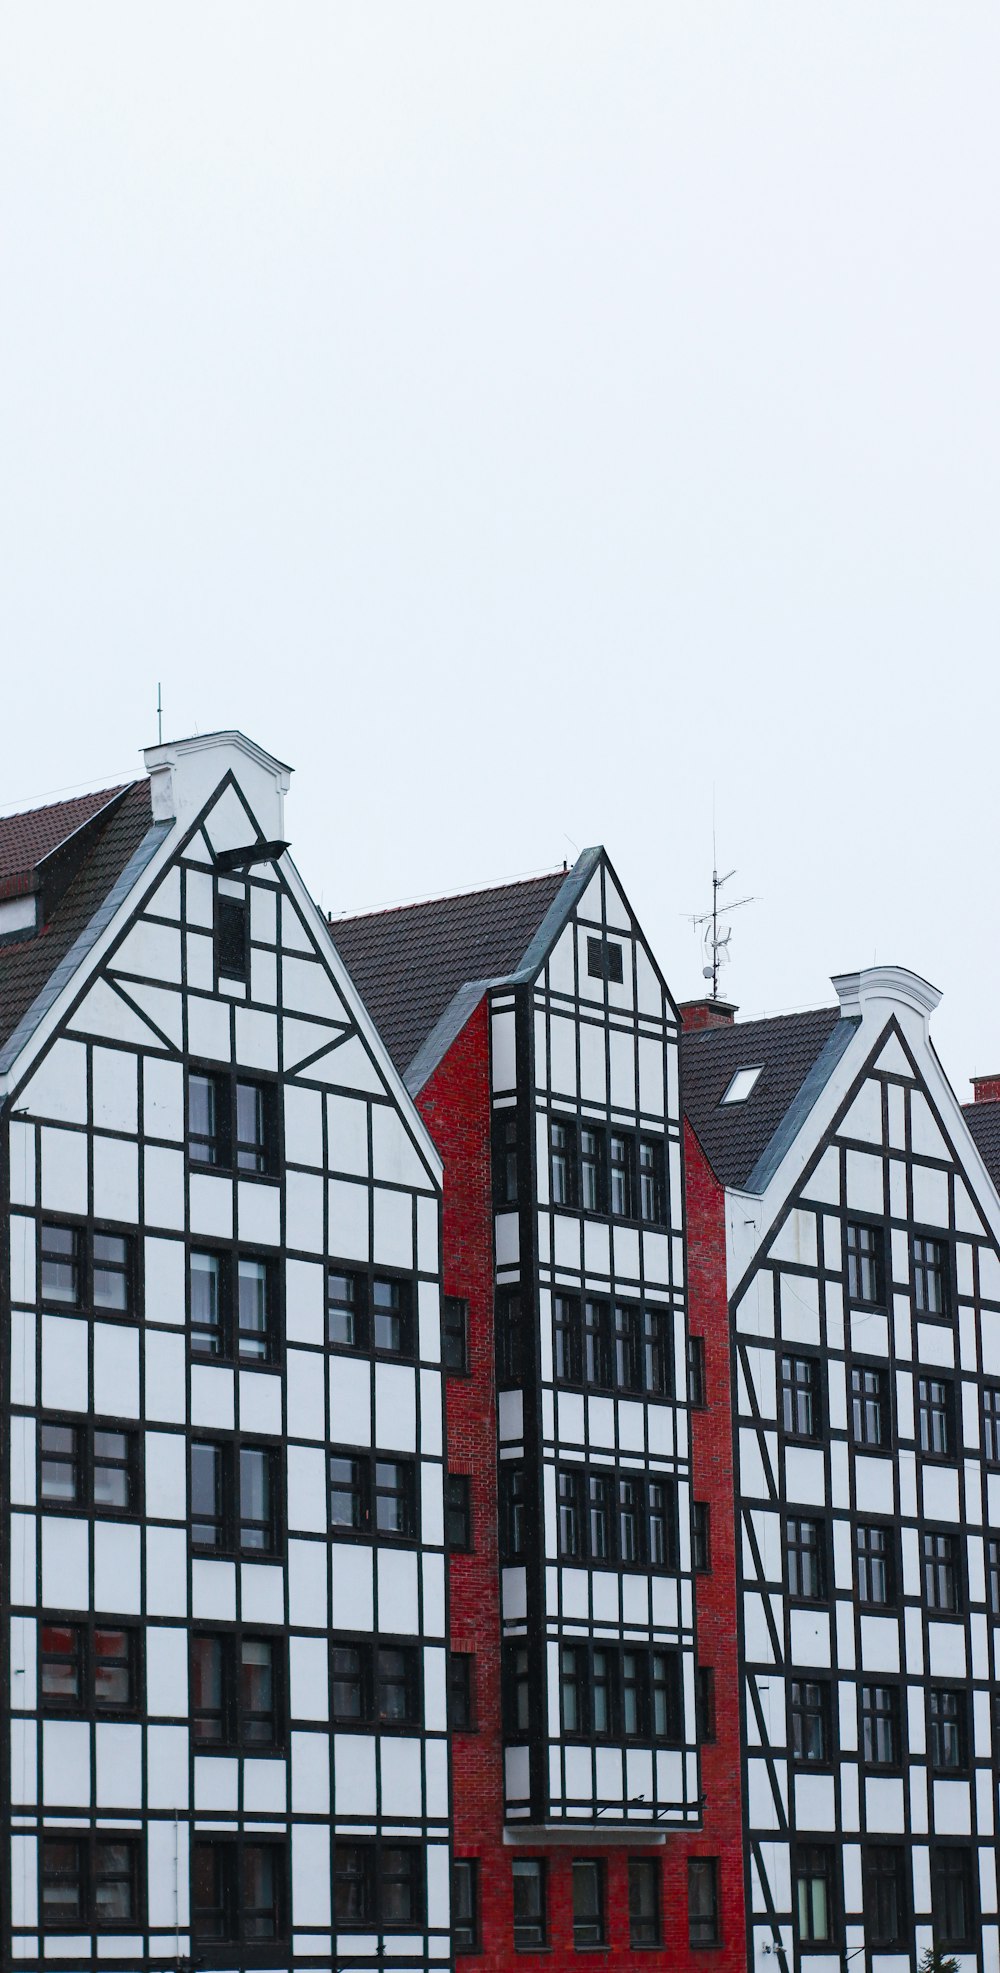 white red and black concrete houses